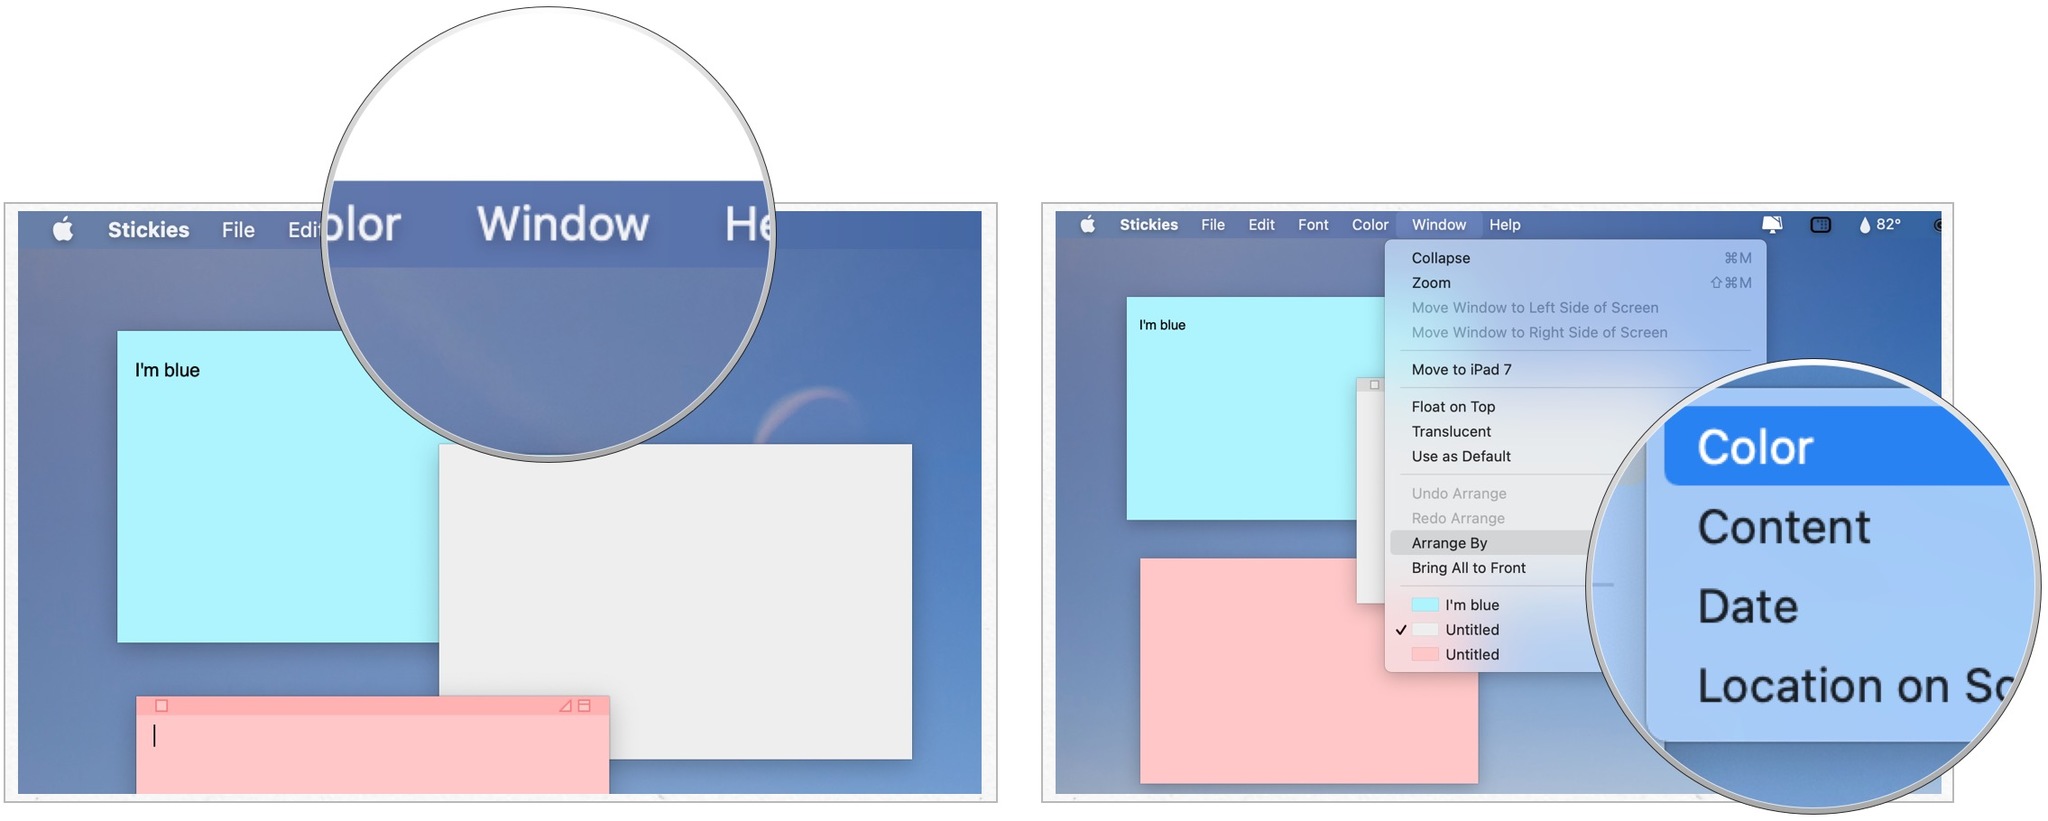 To arrange Stickies, launch Stickies and either create or bring up an existing note. Click Window in the menu bar. Click Arrange By, then choose an Arrangement option.